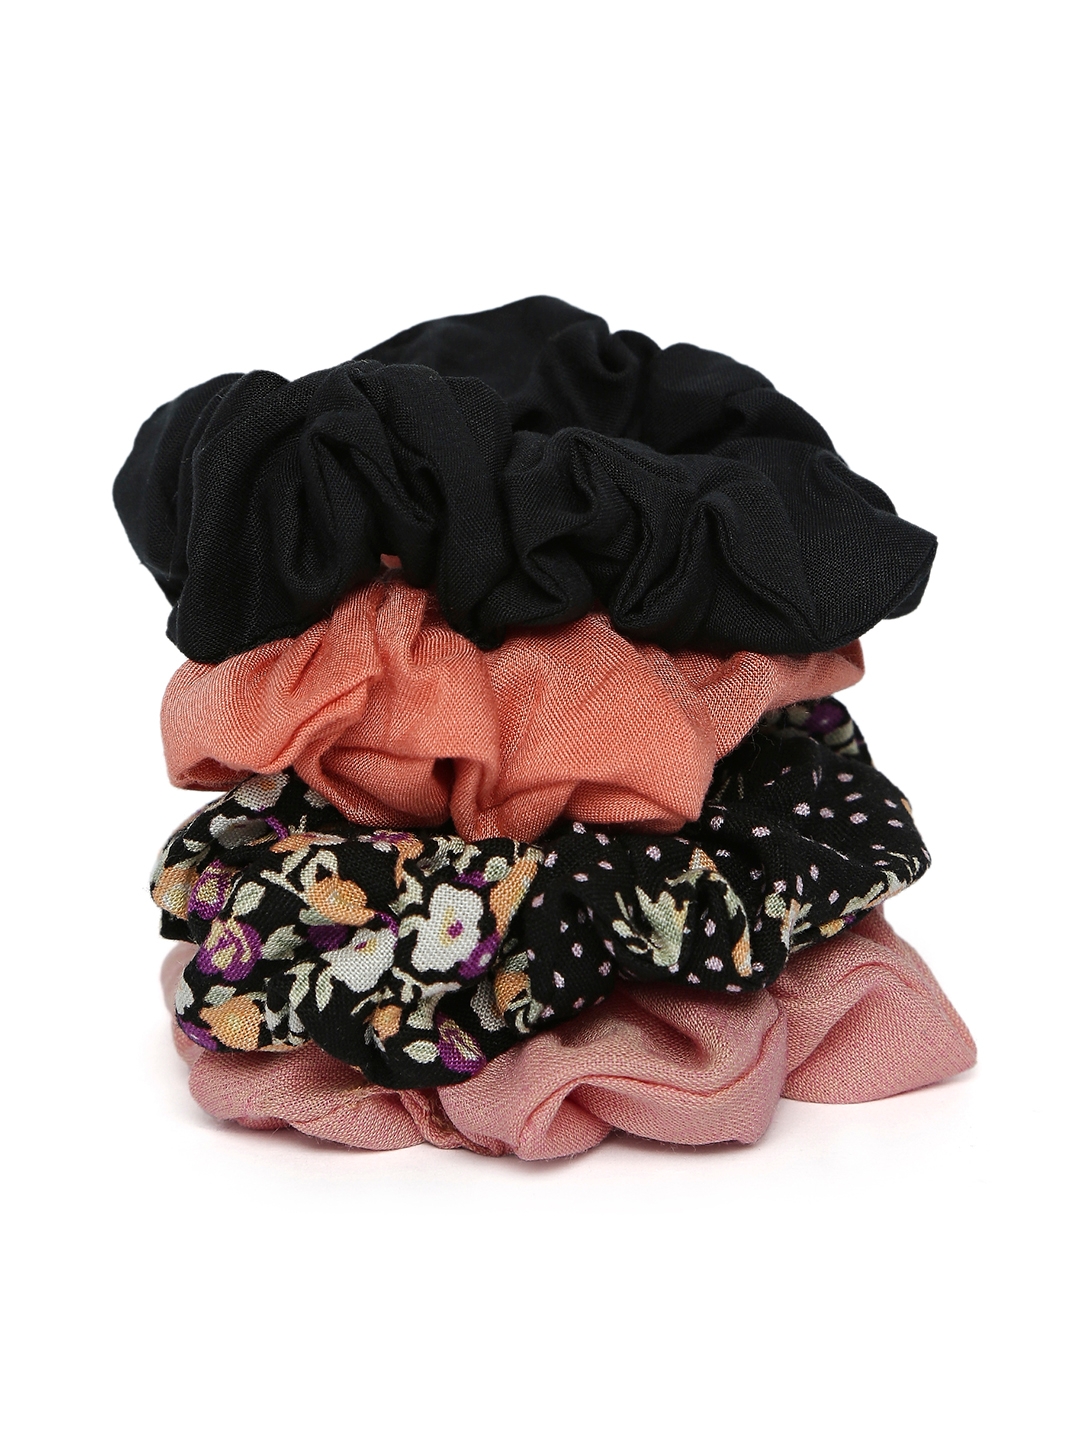 Lilly & Sparkle Peach And Black Combo Scrunchies Set Of 4